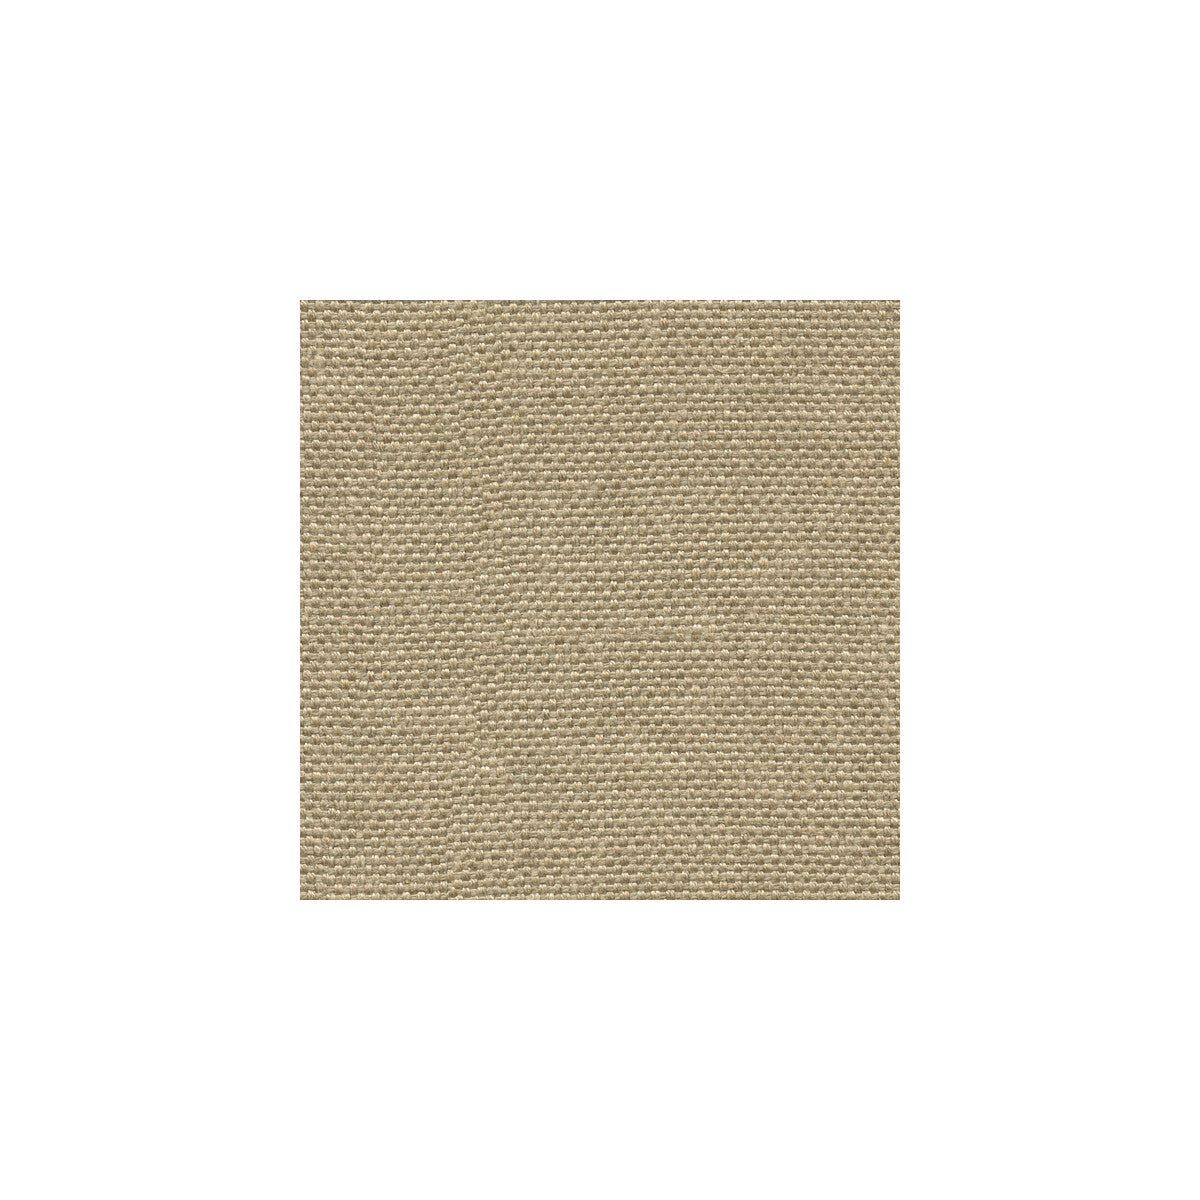 Softened Linen fabric in natural color - pattern 32071.16.0 - by Kravet Couture in the Modern Colors III collection